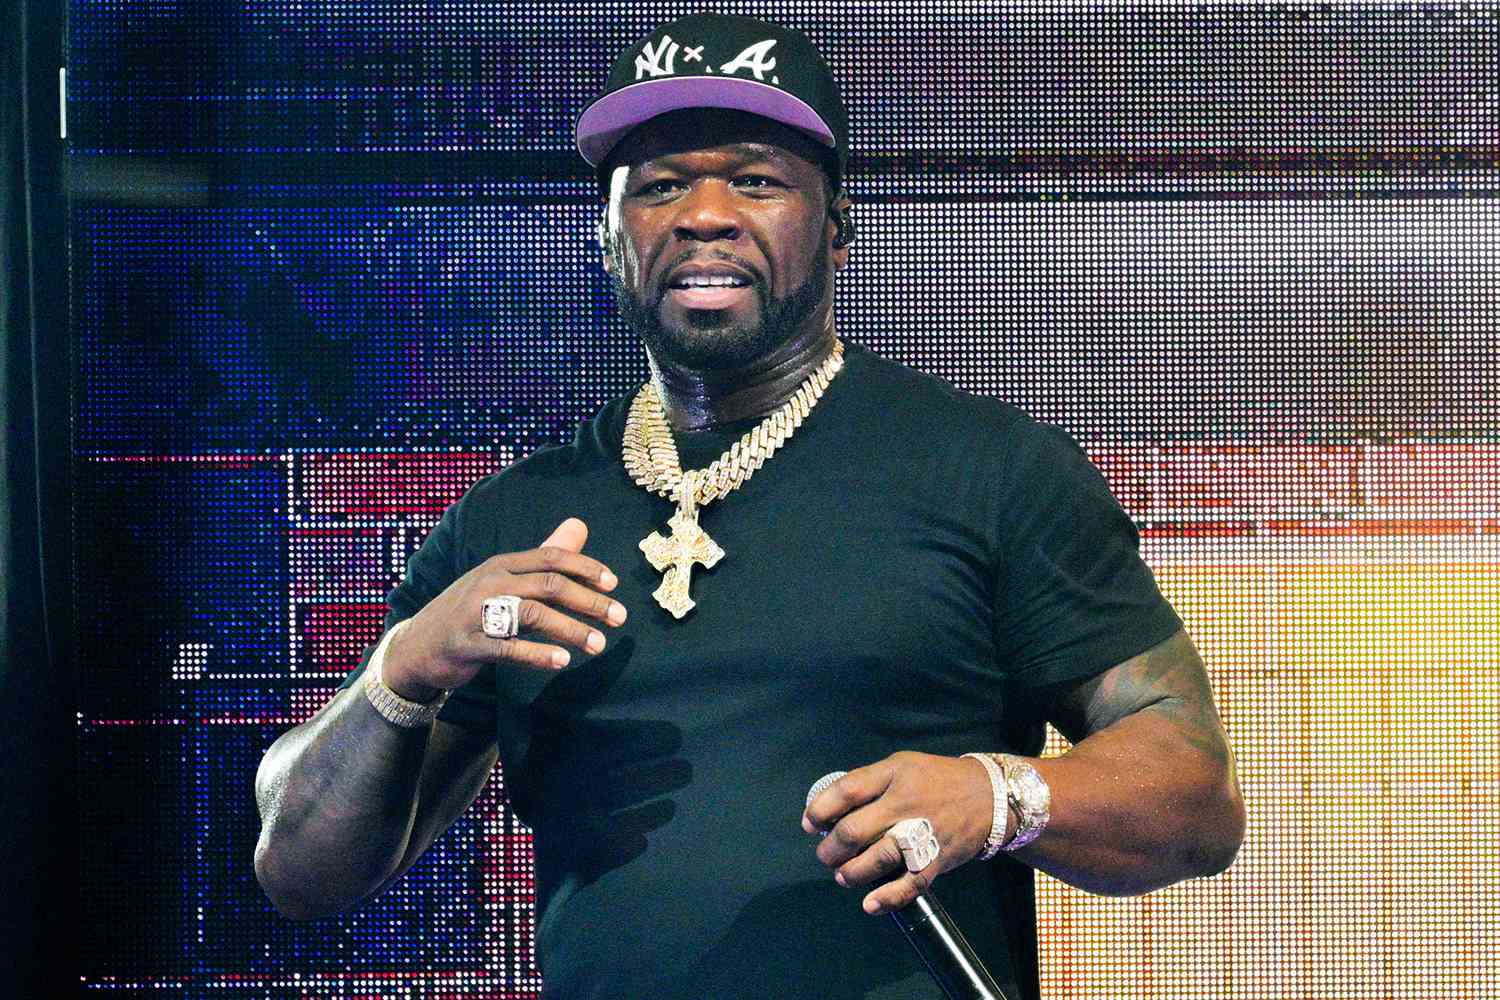 50 Cent hurls mic into crowd at concert and allegedly injures fan